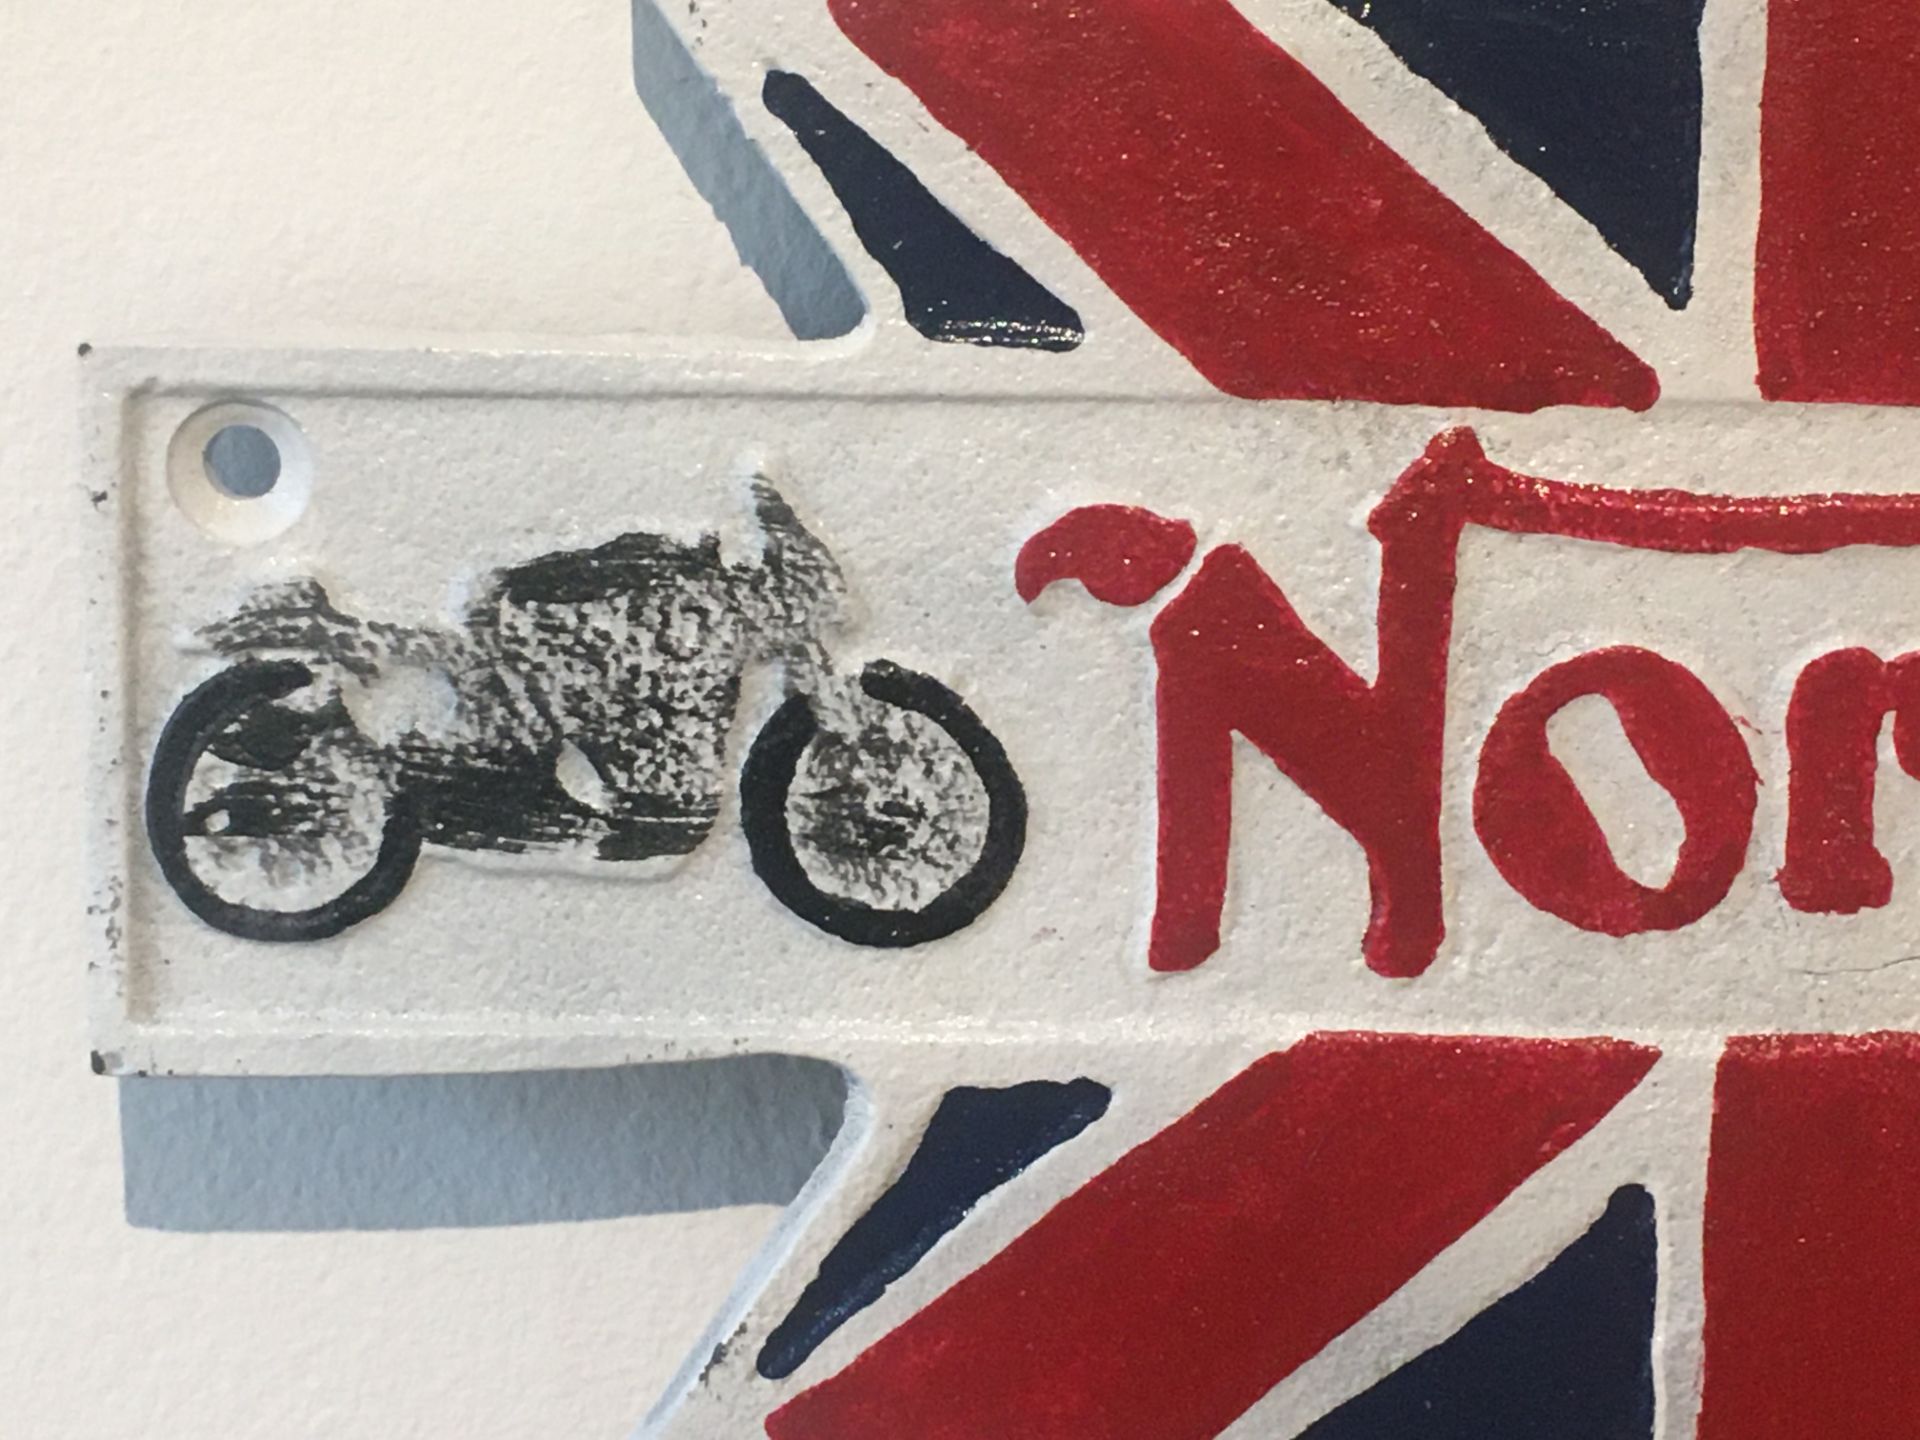 Norton Motorcycles 1898 Cast Iron Sign - Image 3 of 5